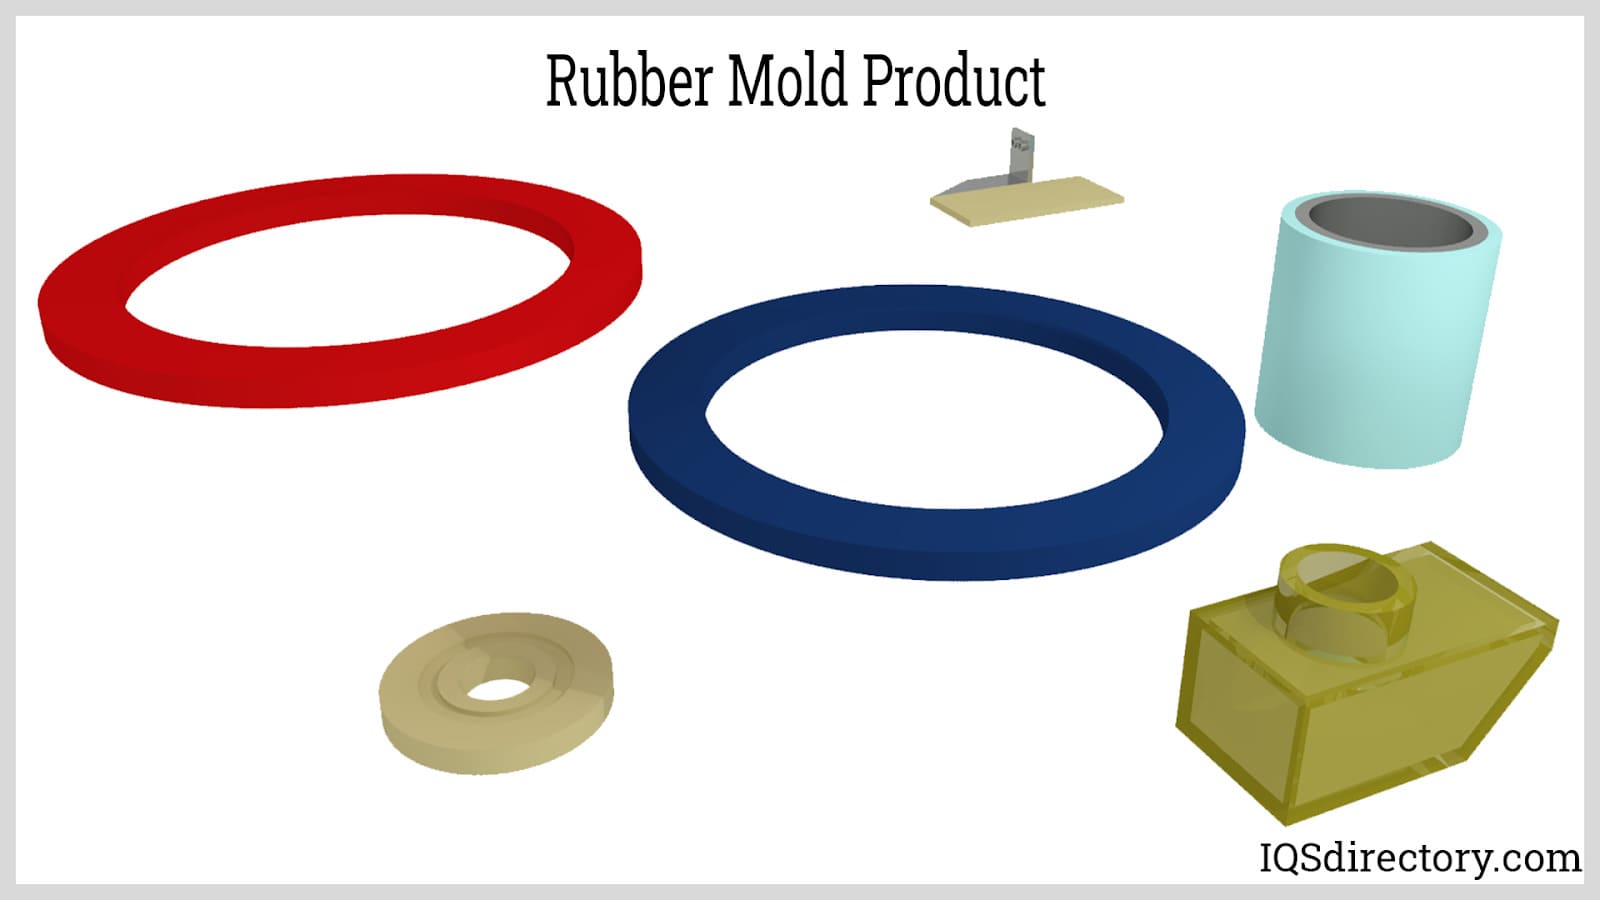 Rubber Mold Product